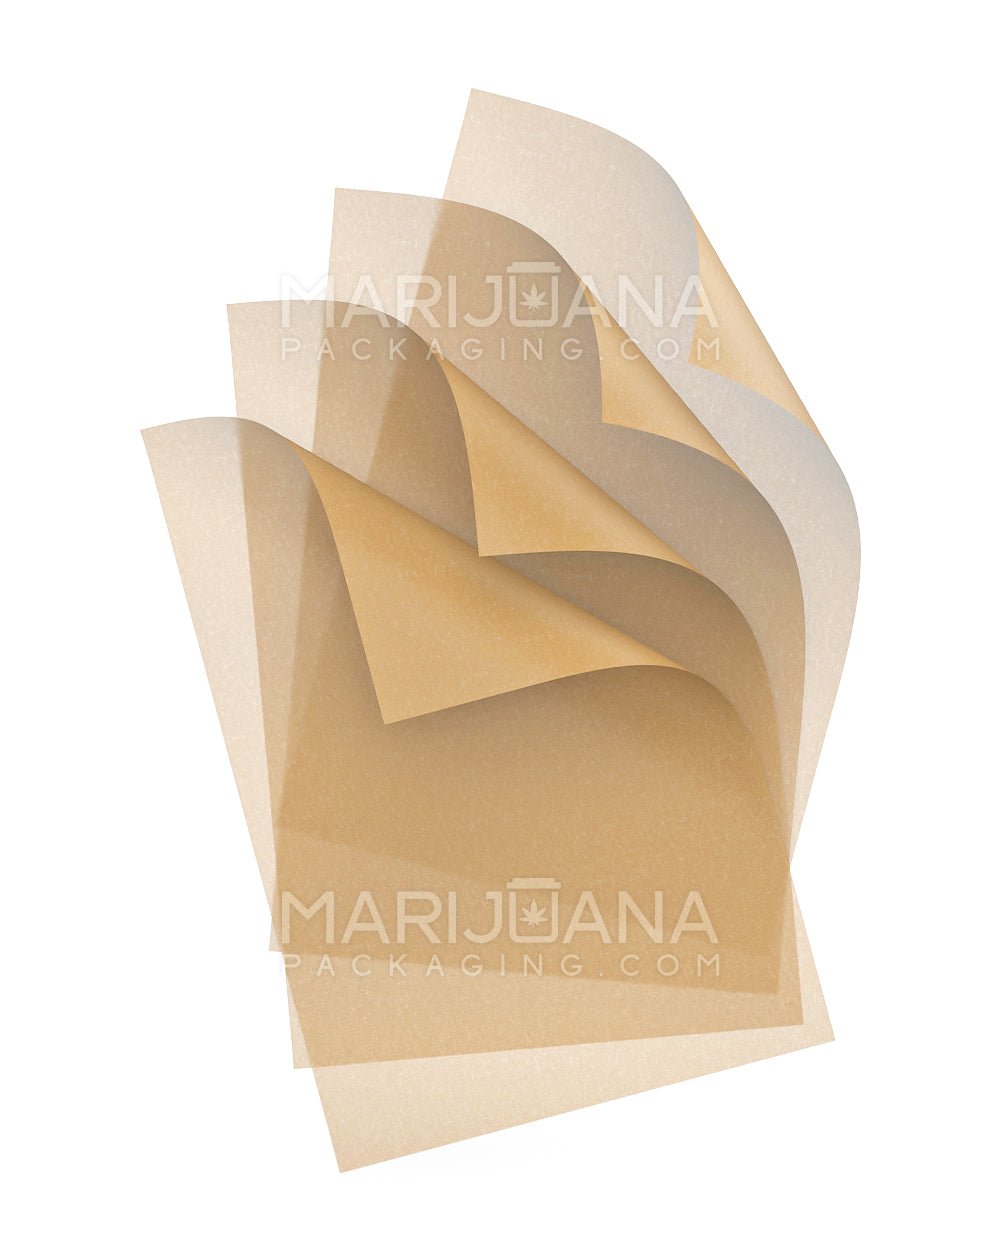 parchment paper square, 4x4 inch, silicone-coated for wax, dabs, or rosin,  package of 4 thousand sheets